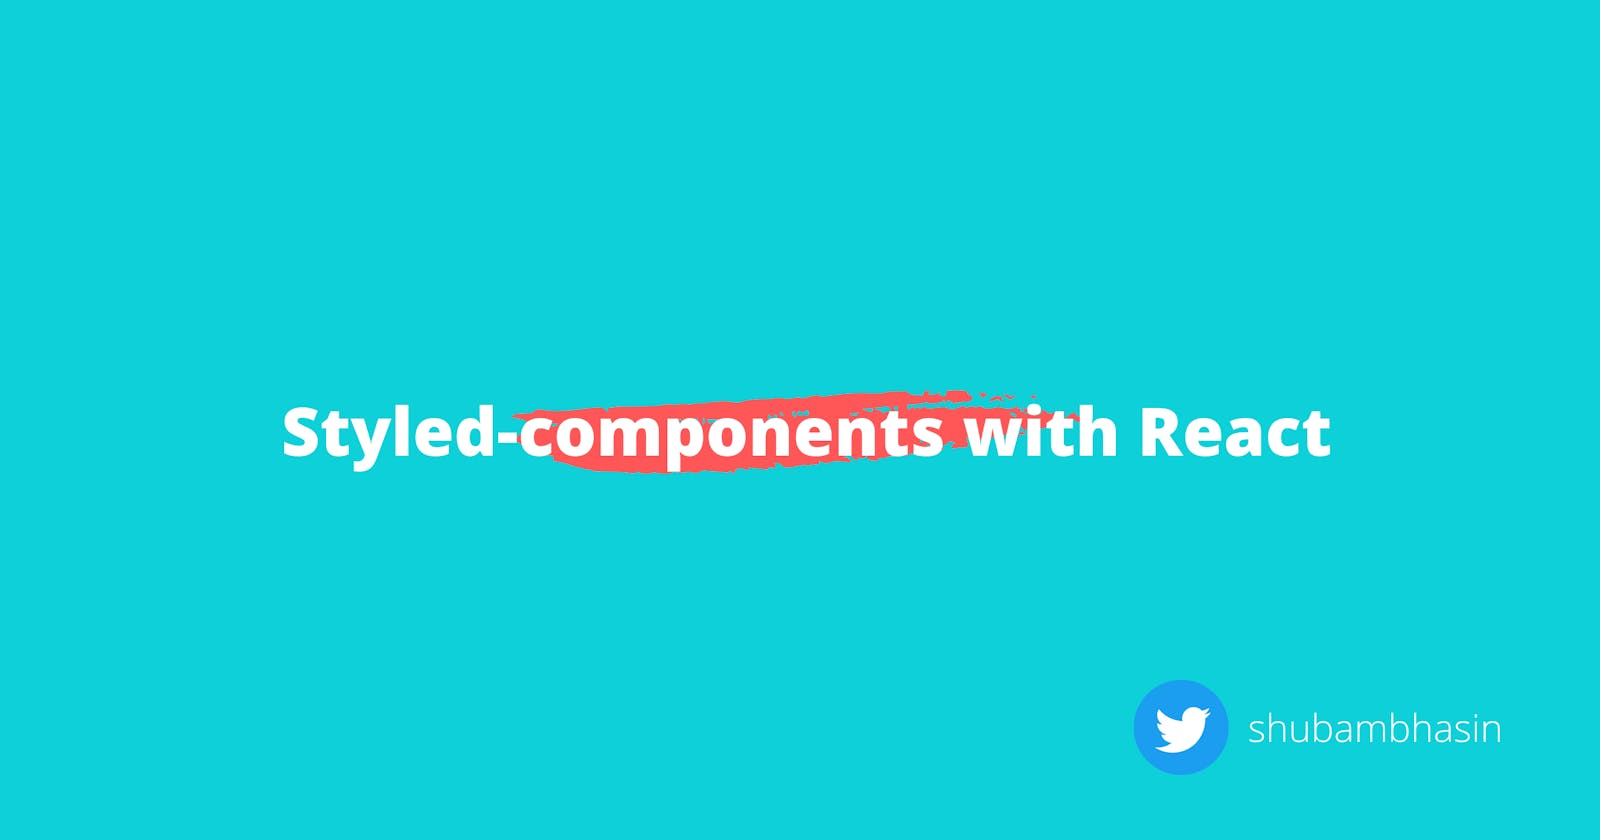 Using Styled-components with React